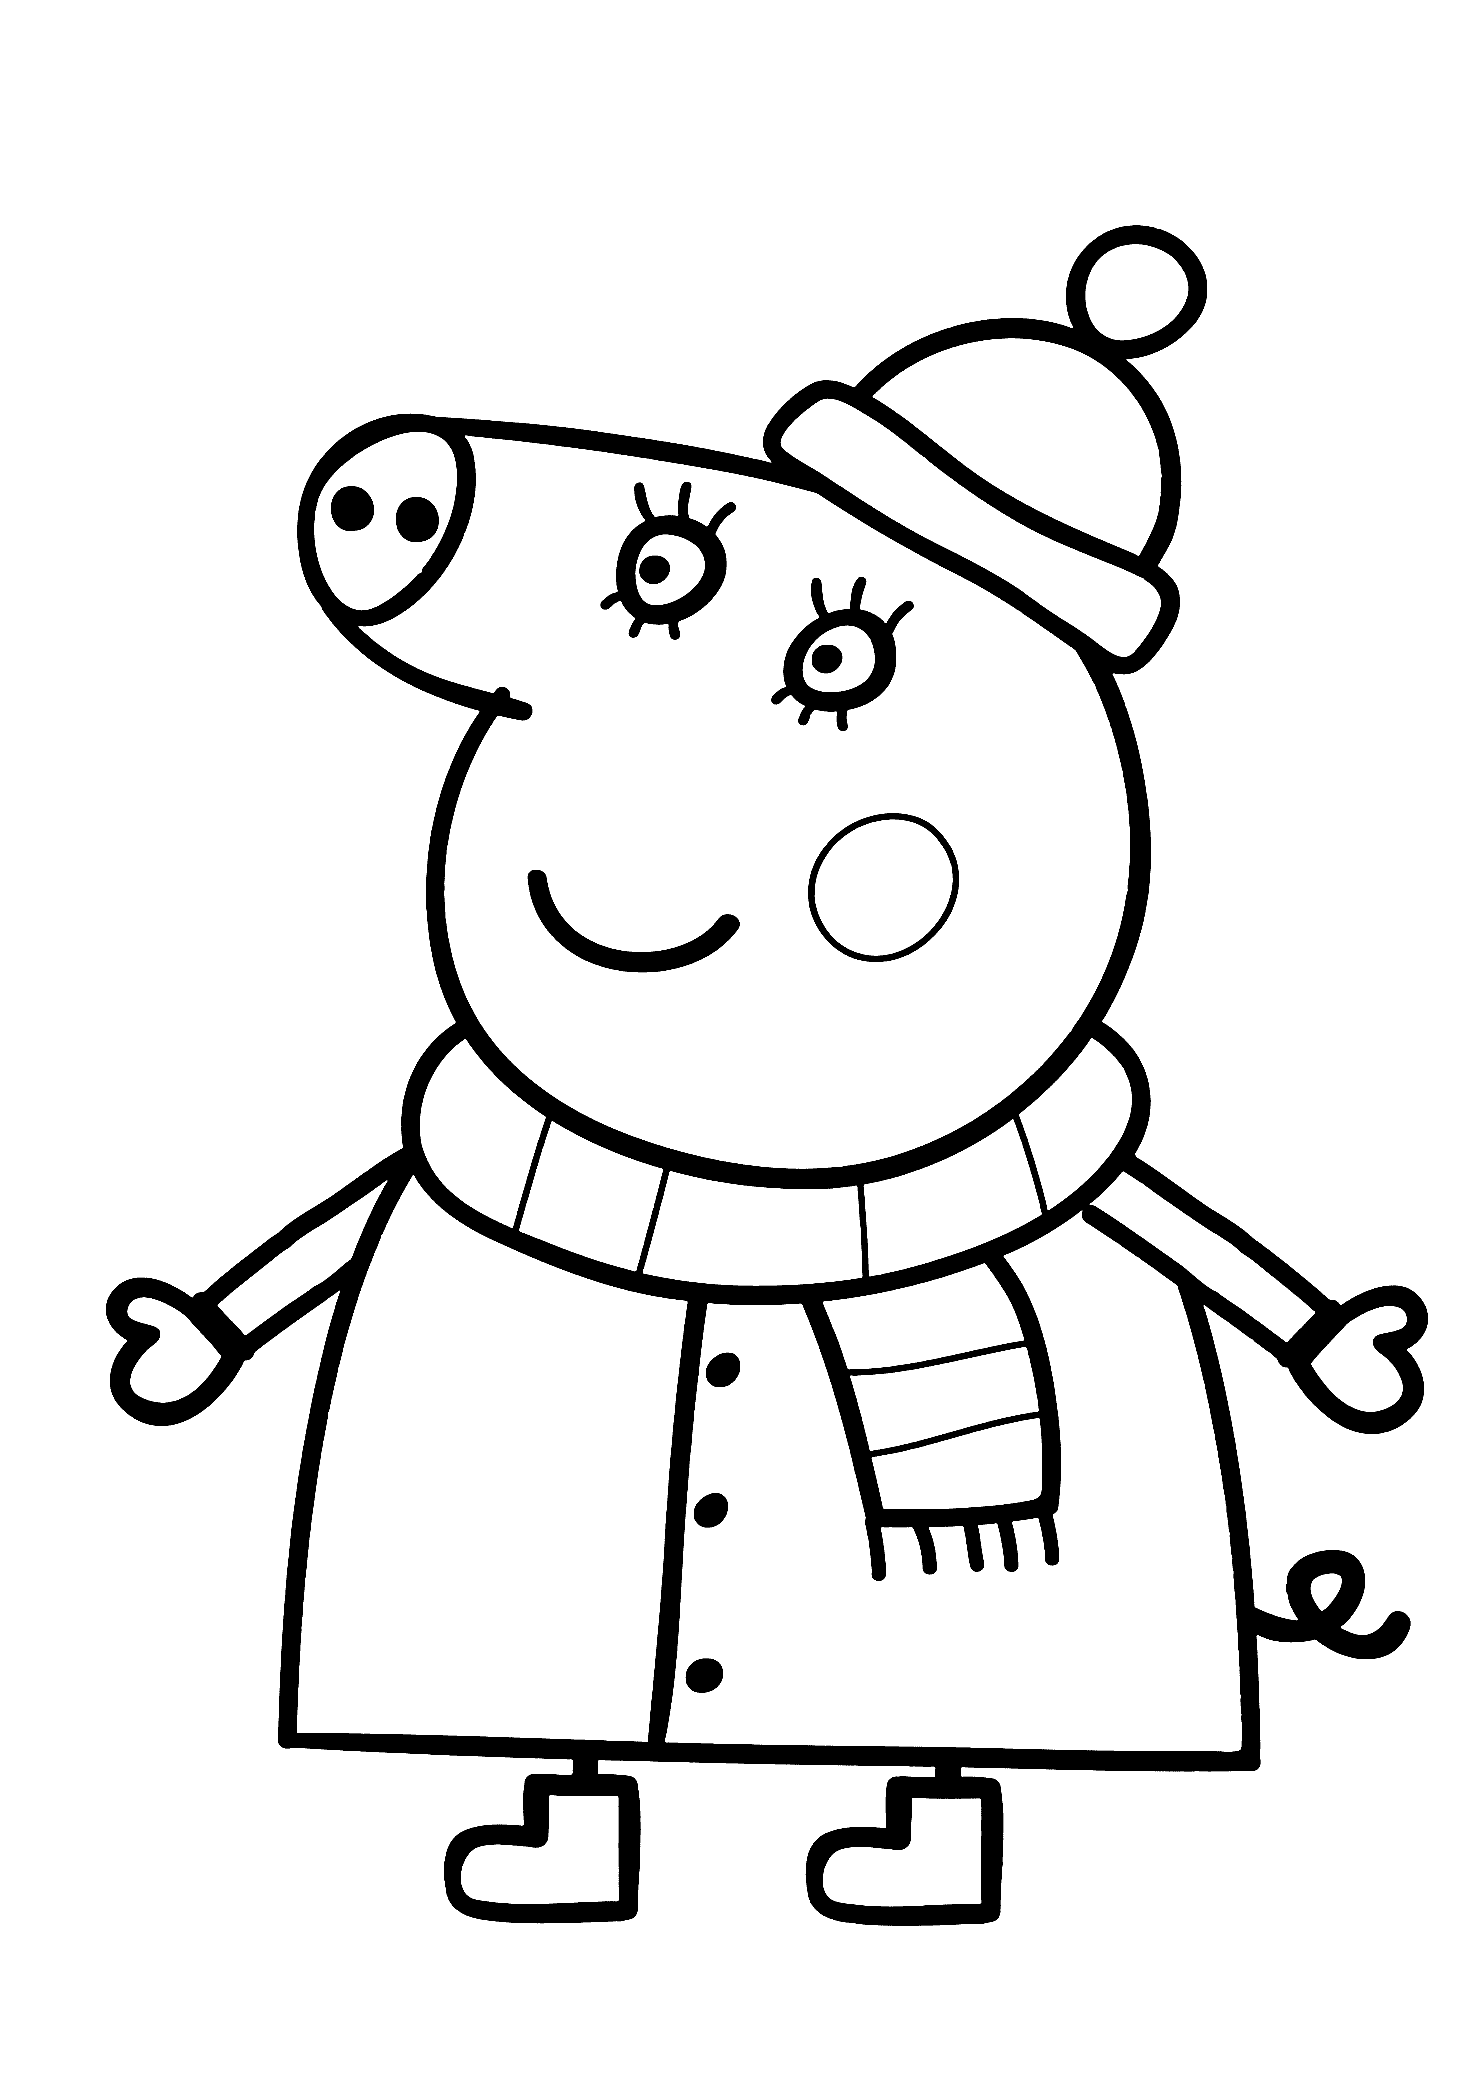 Halloween colouring pages to print at getdrawings com free. Free Peppa Pig Coloring Pages Halloween Download Free Peppa Pig Coloring Pages Halloween Png Images Free Cliparts On Clipart Library